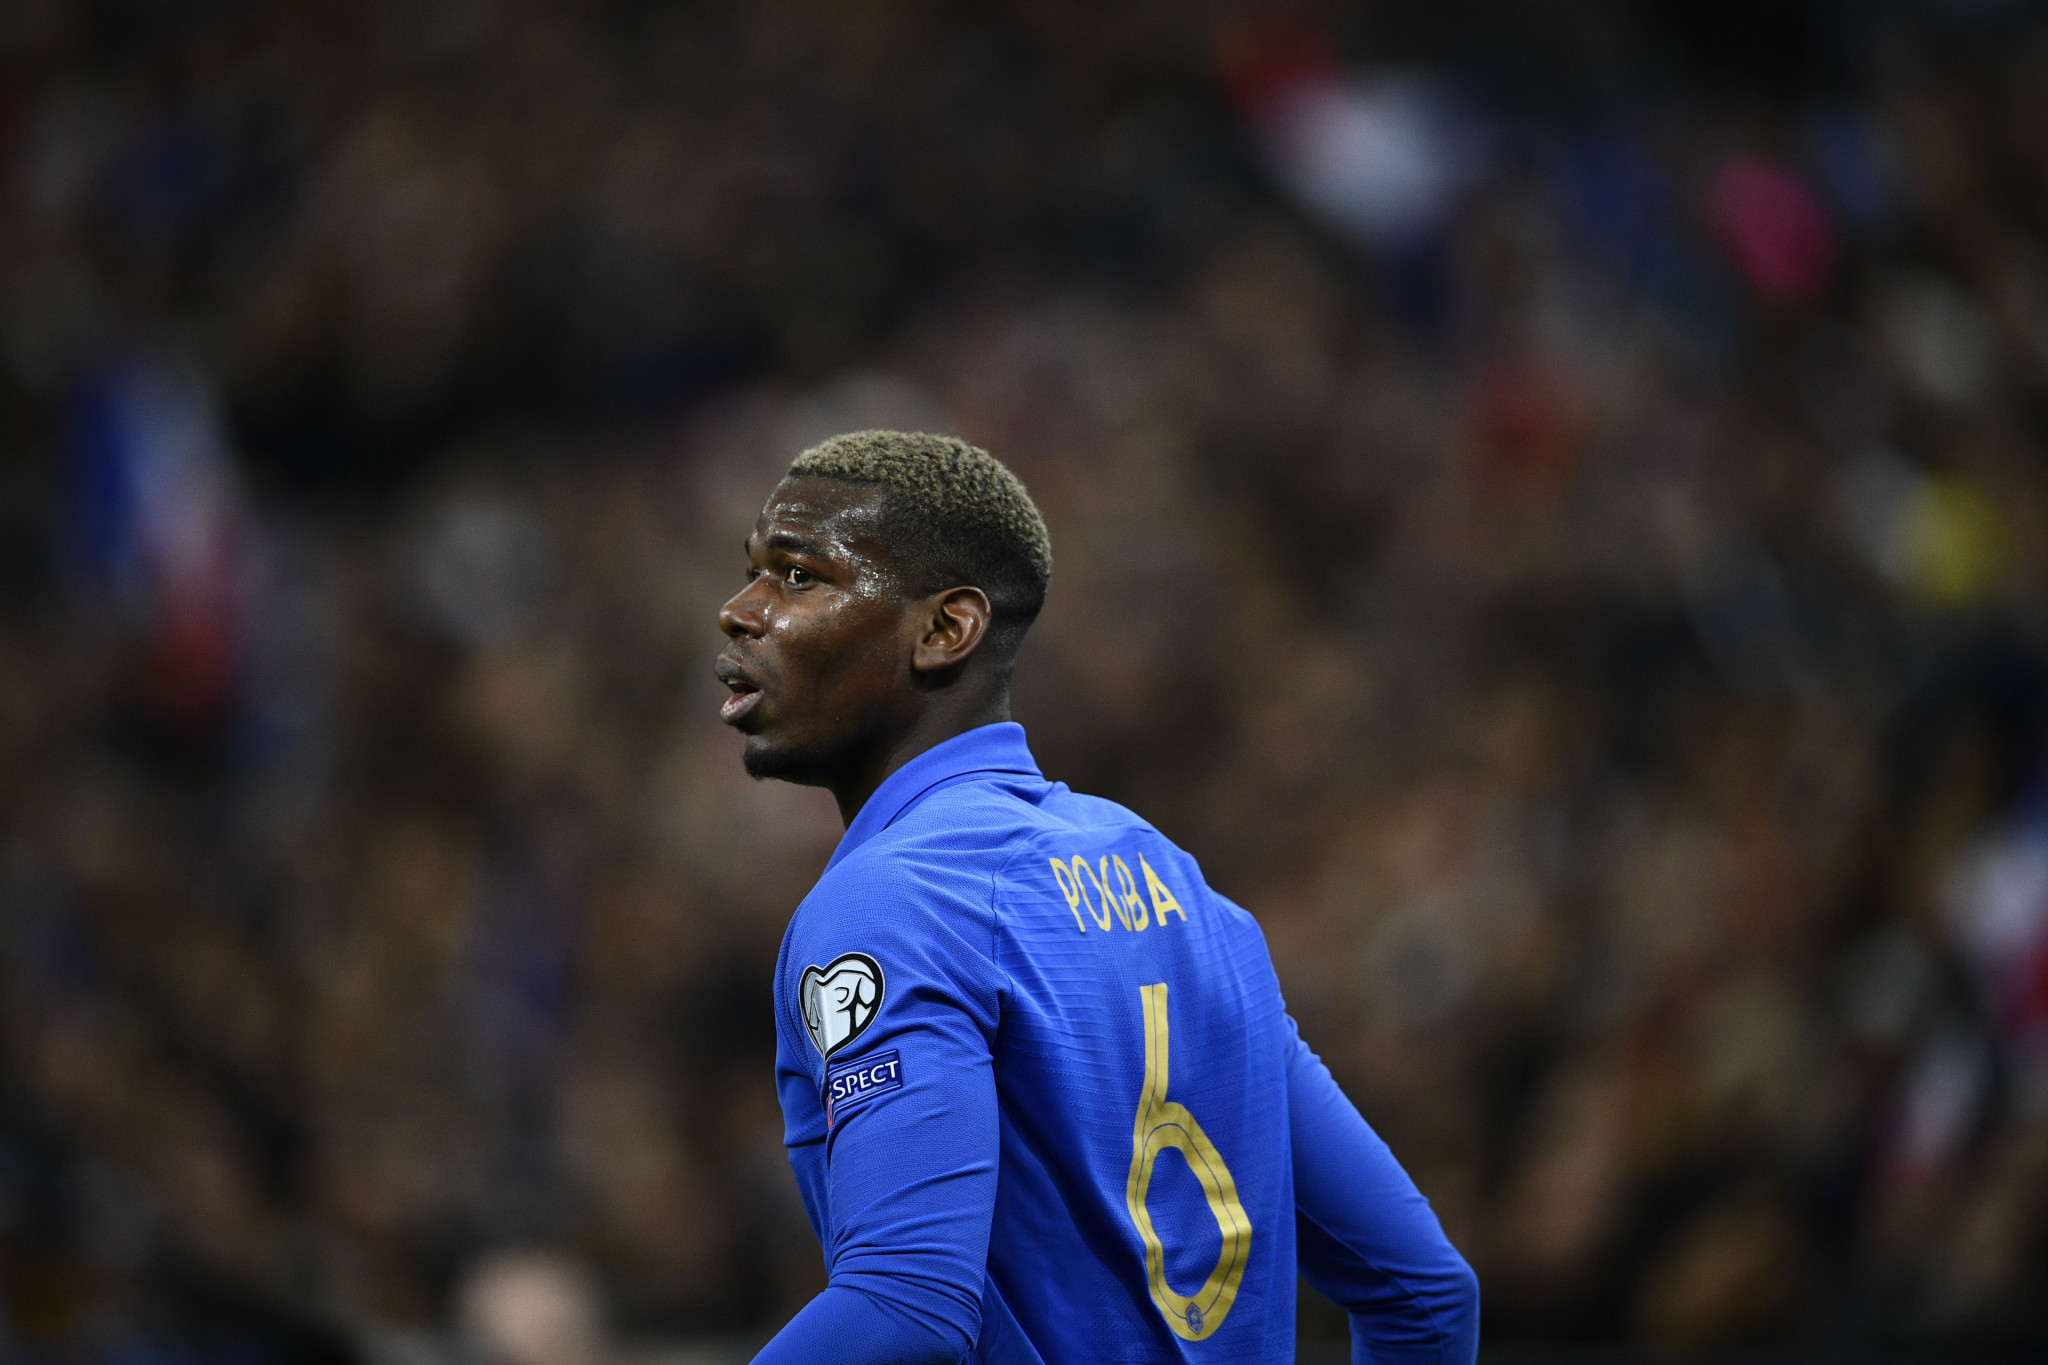 France's Paul Pogba won the 2013 event before winning the FIFA World Cup five years later ©Getty Images